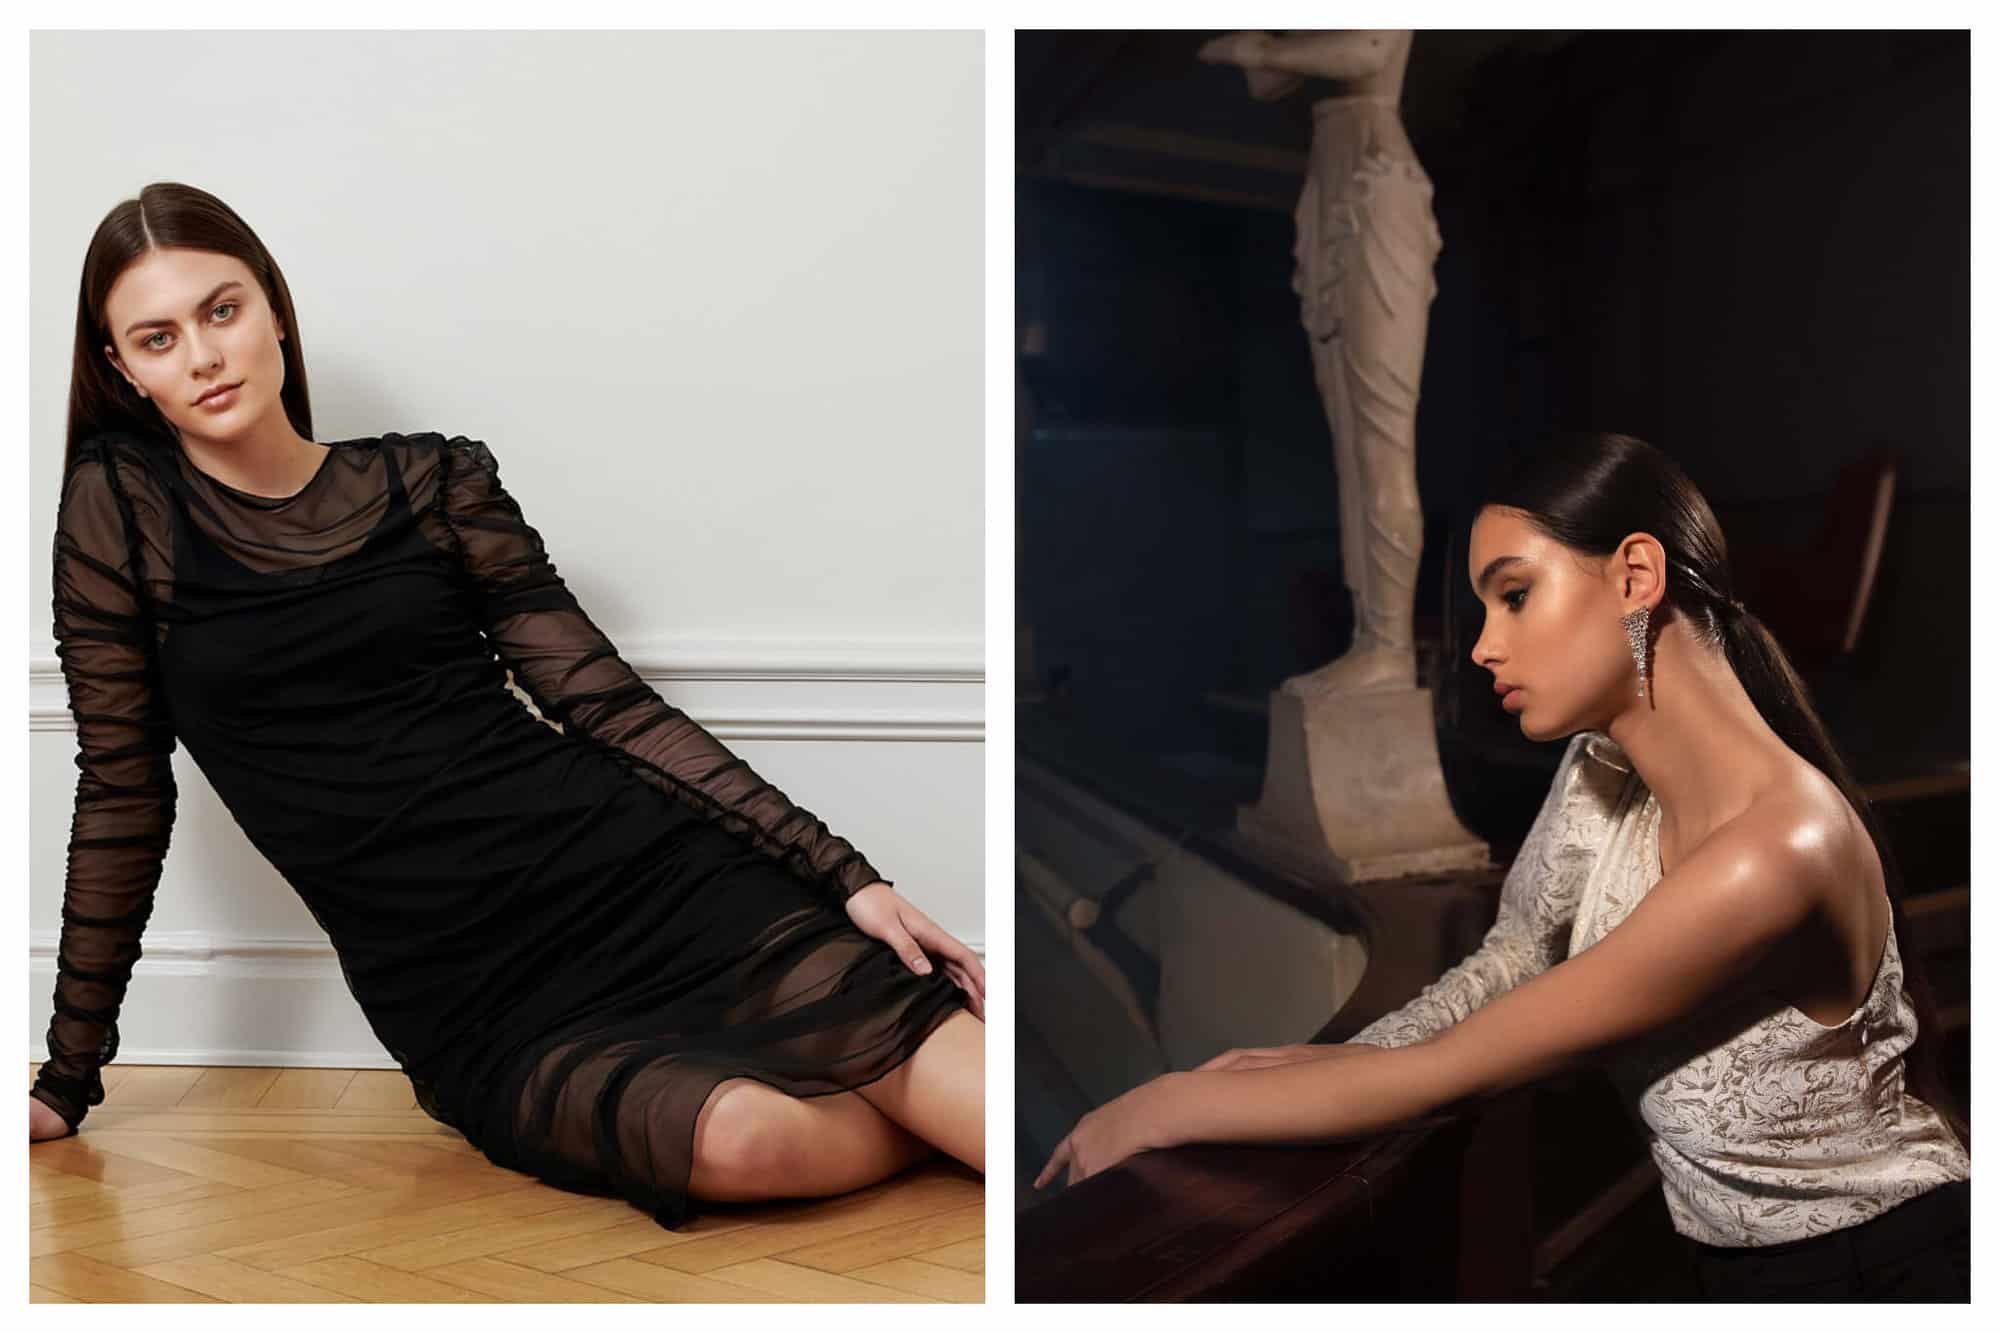 Left: a woman with brown hair is sitting on a hardwood floor in front of a white wall. She is looking directly into the camera and she has on a short black dress with long sheer sleeves. Right: a woman with brown hair is standing with her left side to the camera as she looks into the distance. She has on a white top with one long sleeve and one arm exposed. There is a white statue visible in the background.